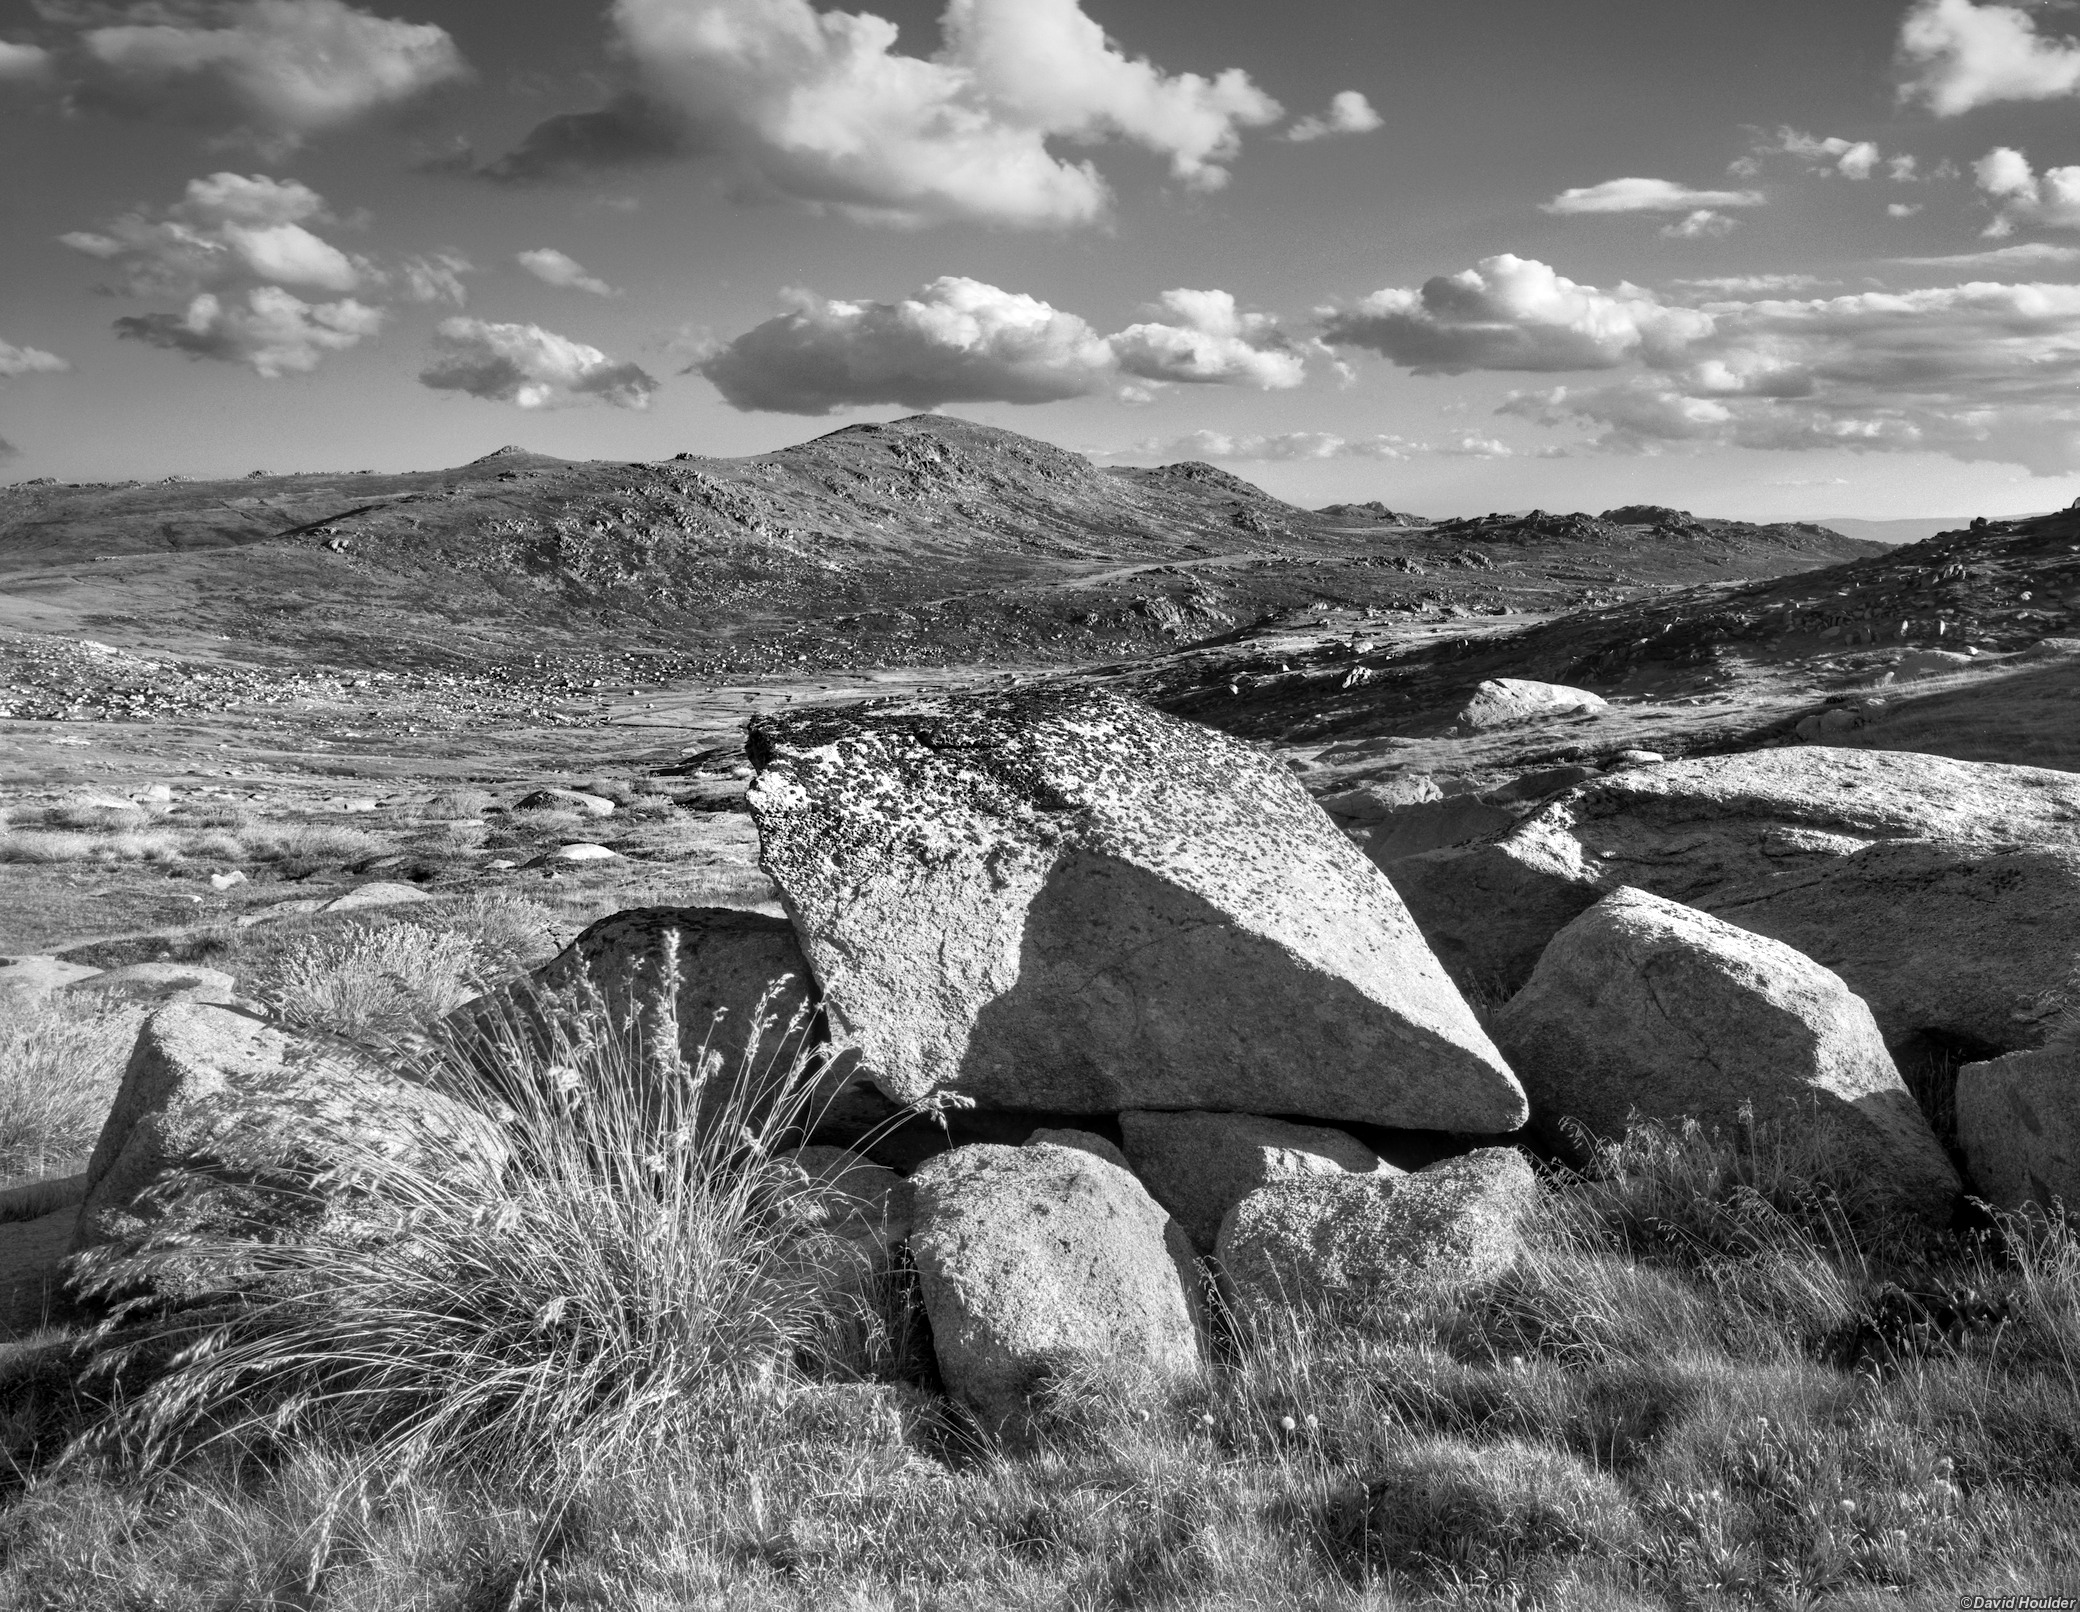 Jagged granite boulders and grasses, with Mt Kosciuszko and cloudy sky in the distance